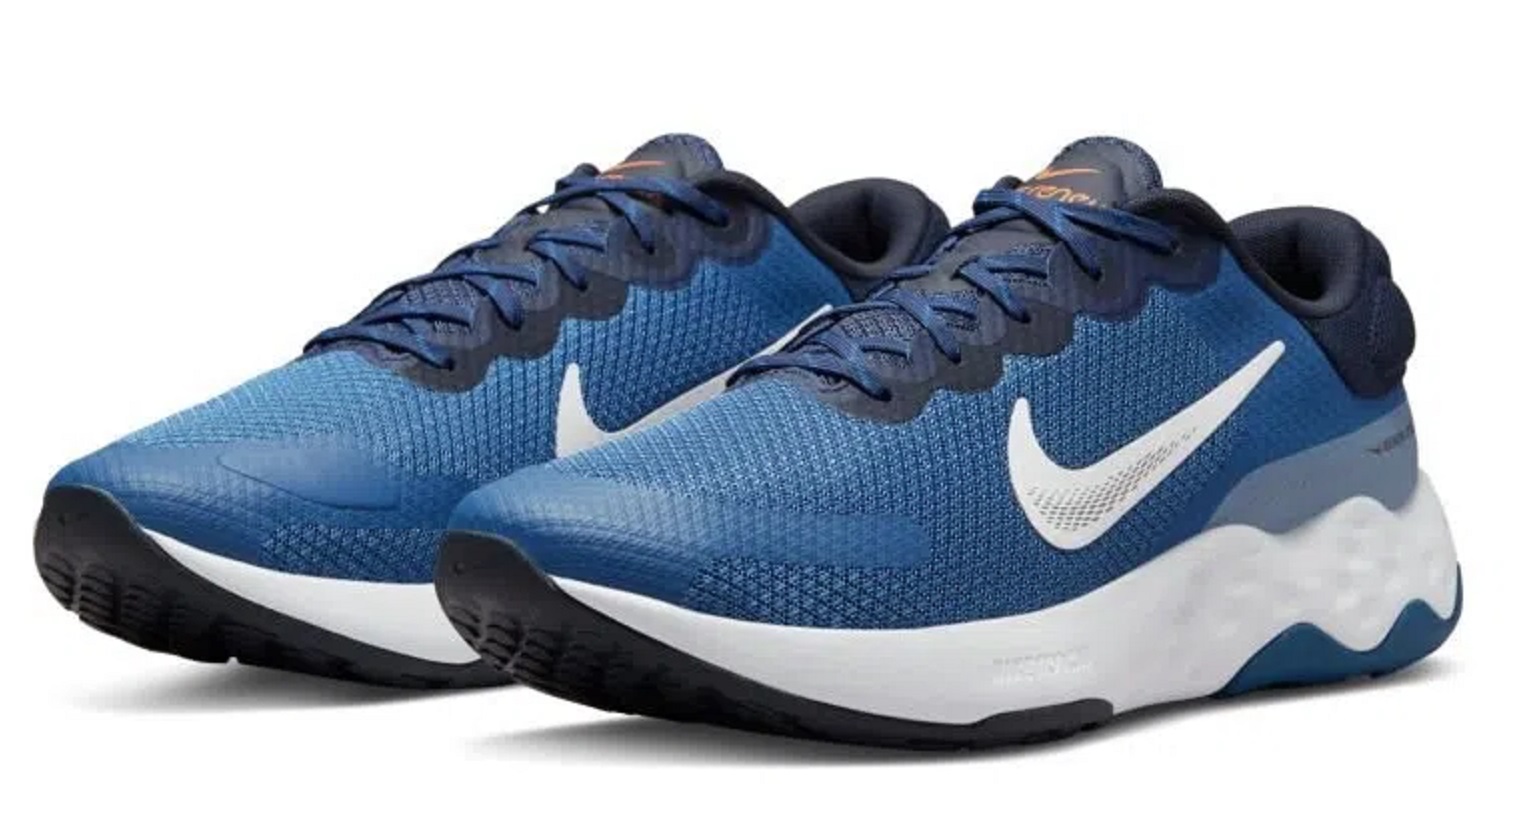 Nike Men's Renew Ride 3 Running Shoe, Limited Edtion Color